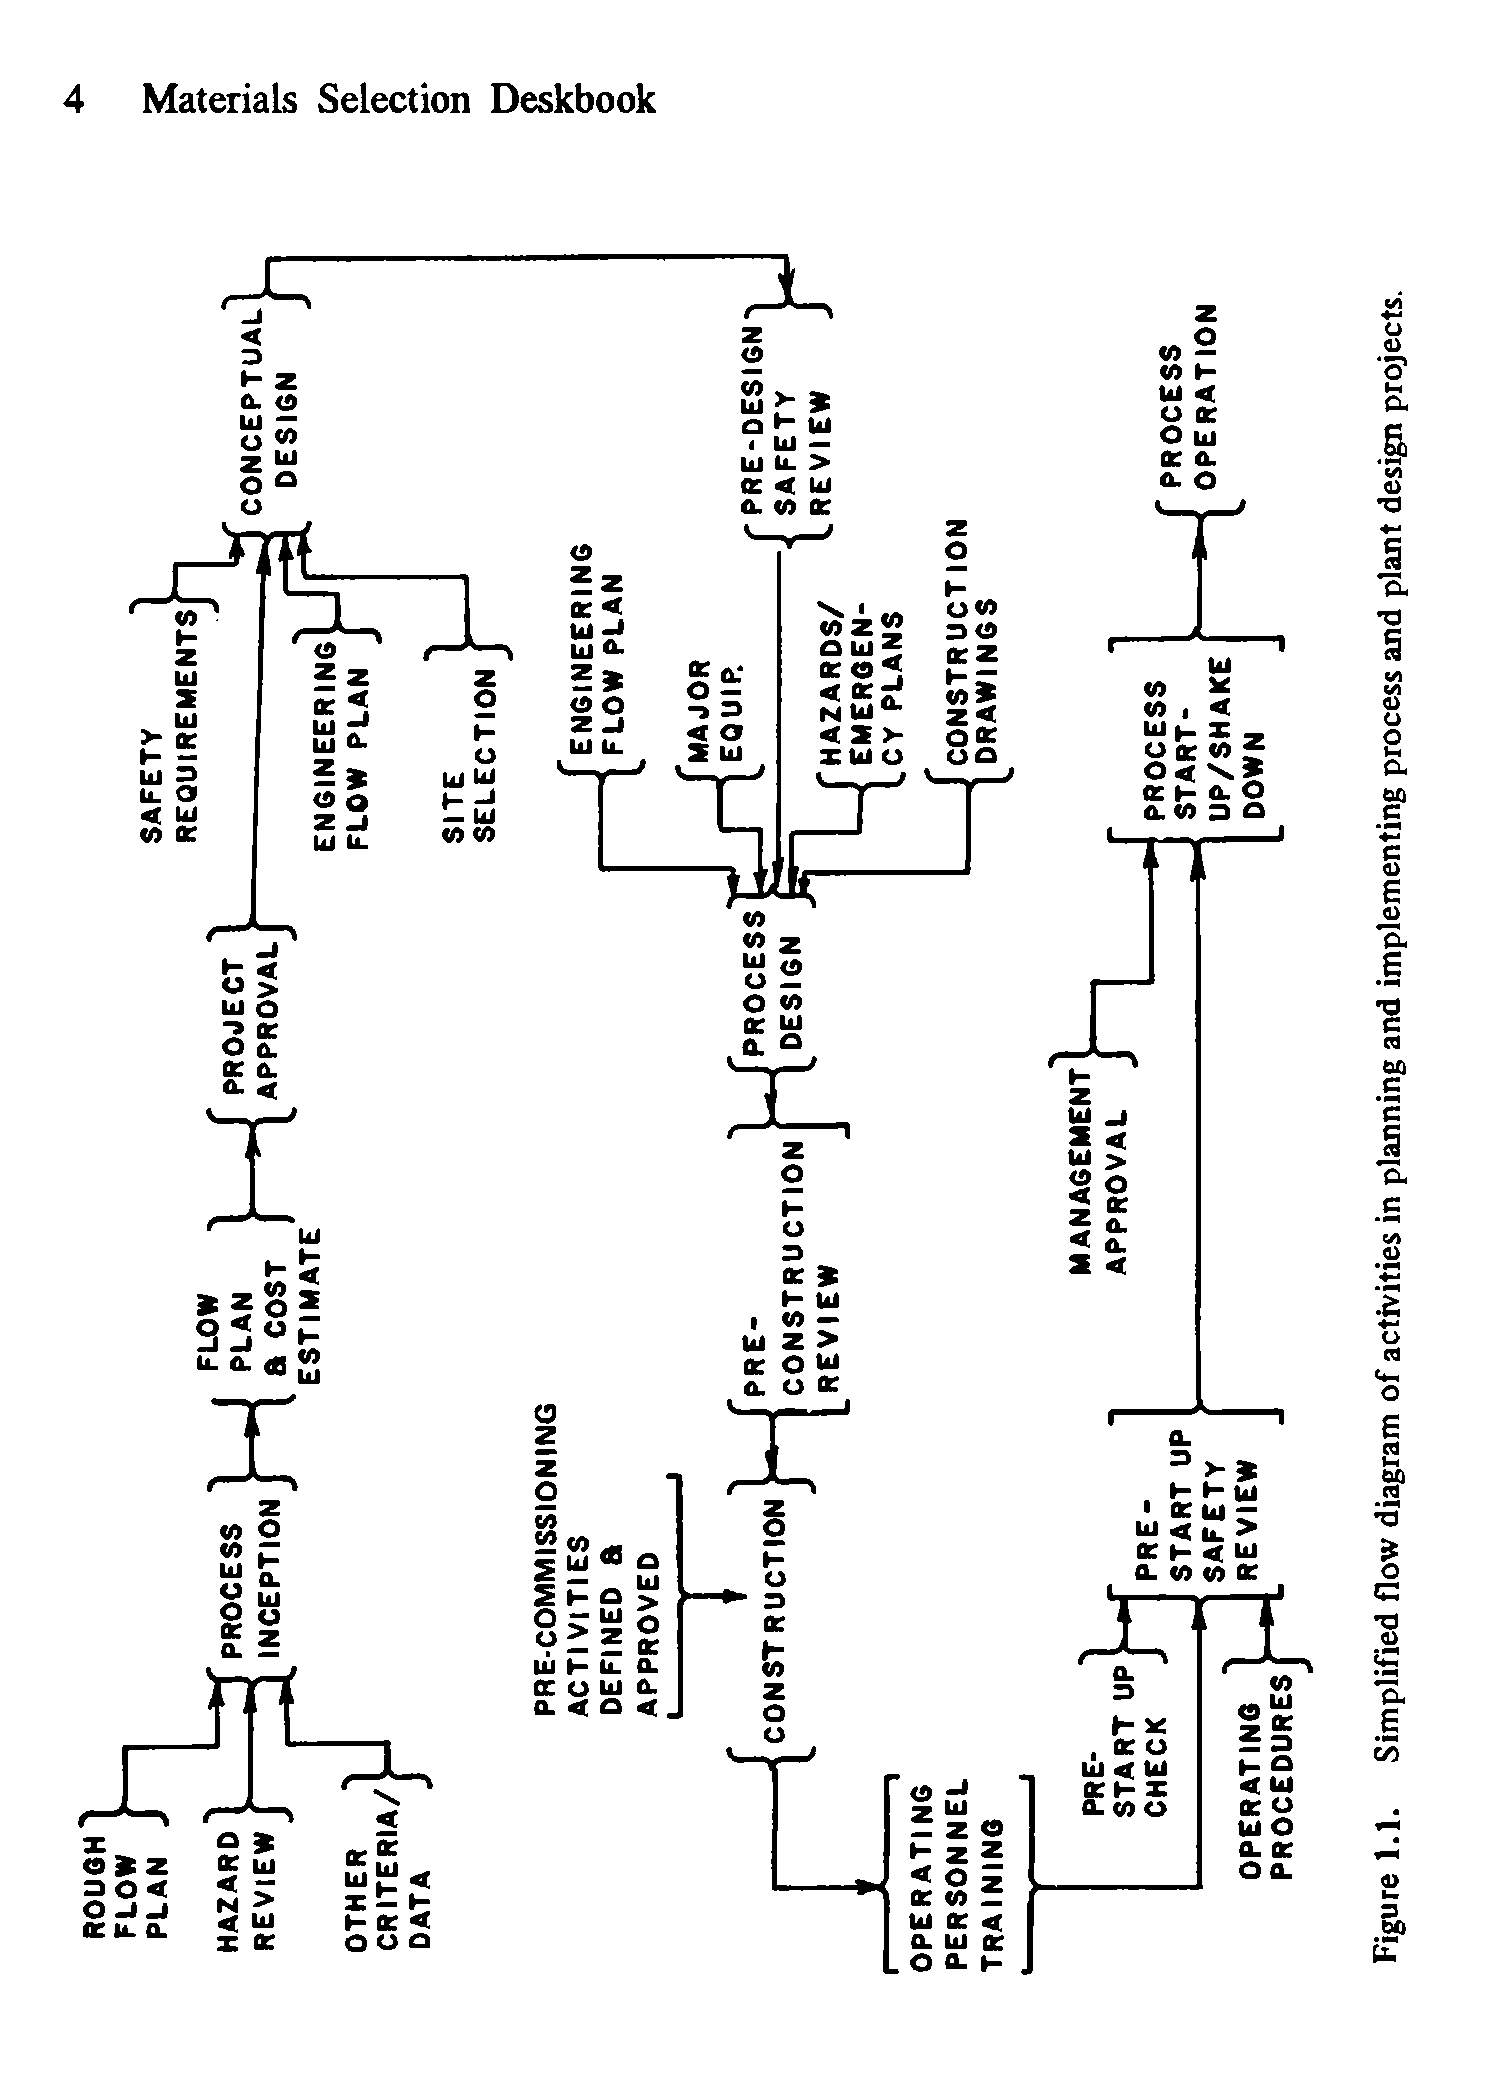 Figure 1.1. Simplified flow diagram of activities in planning and implementing process and plant design projects.